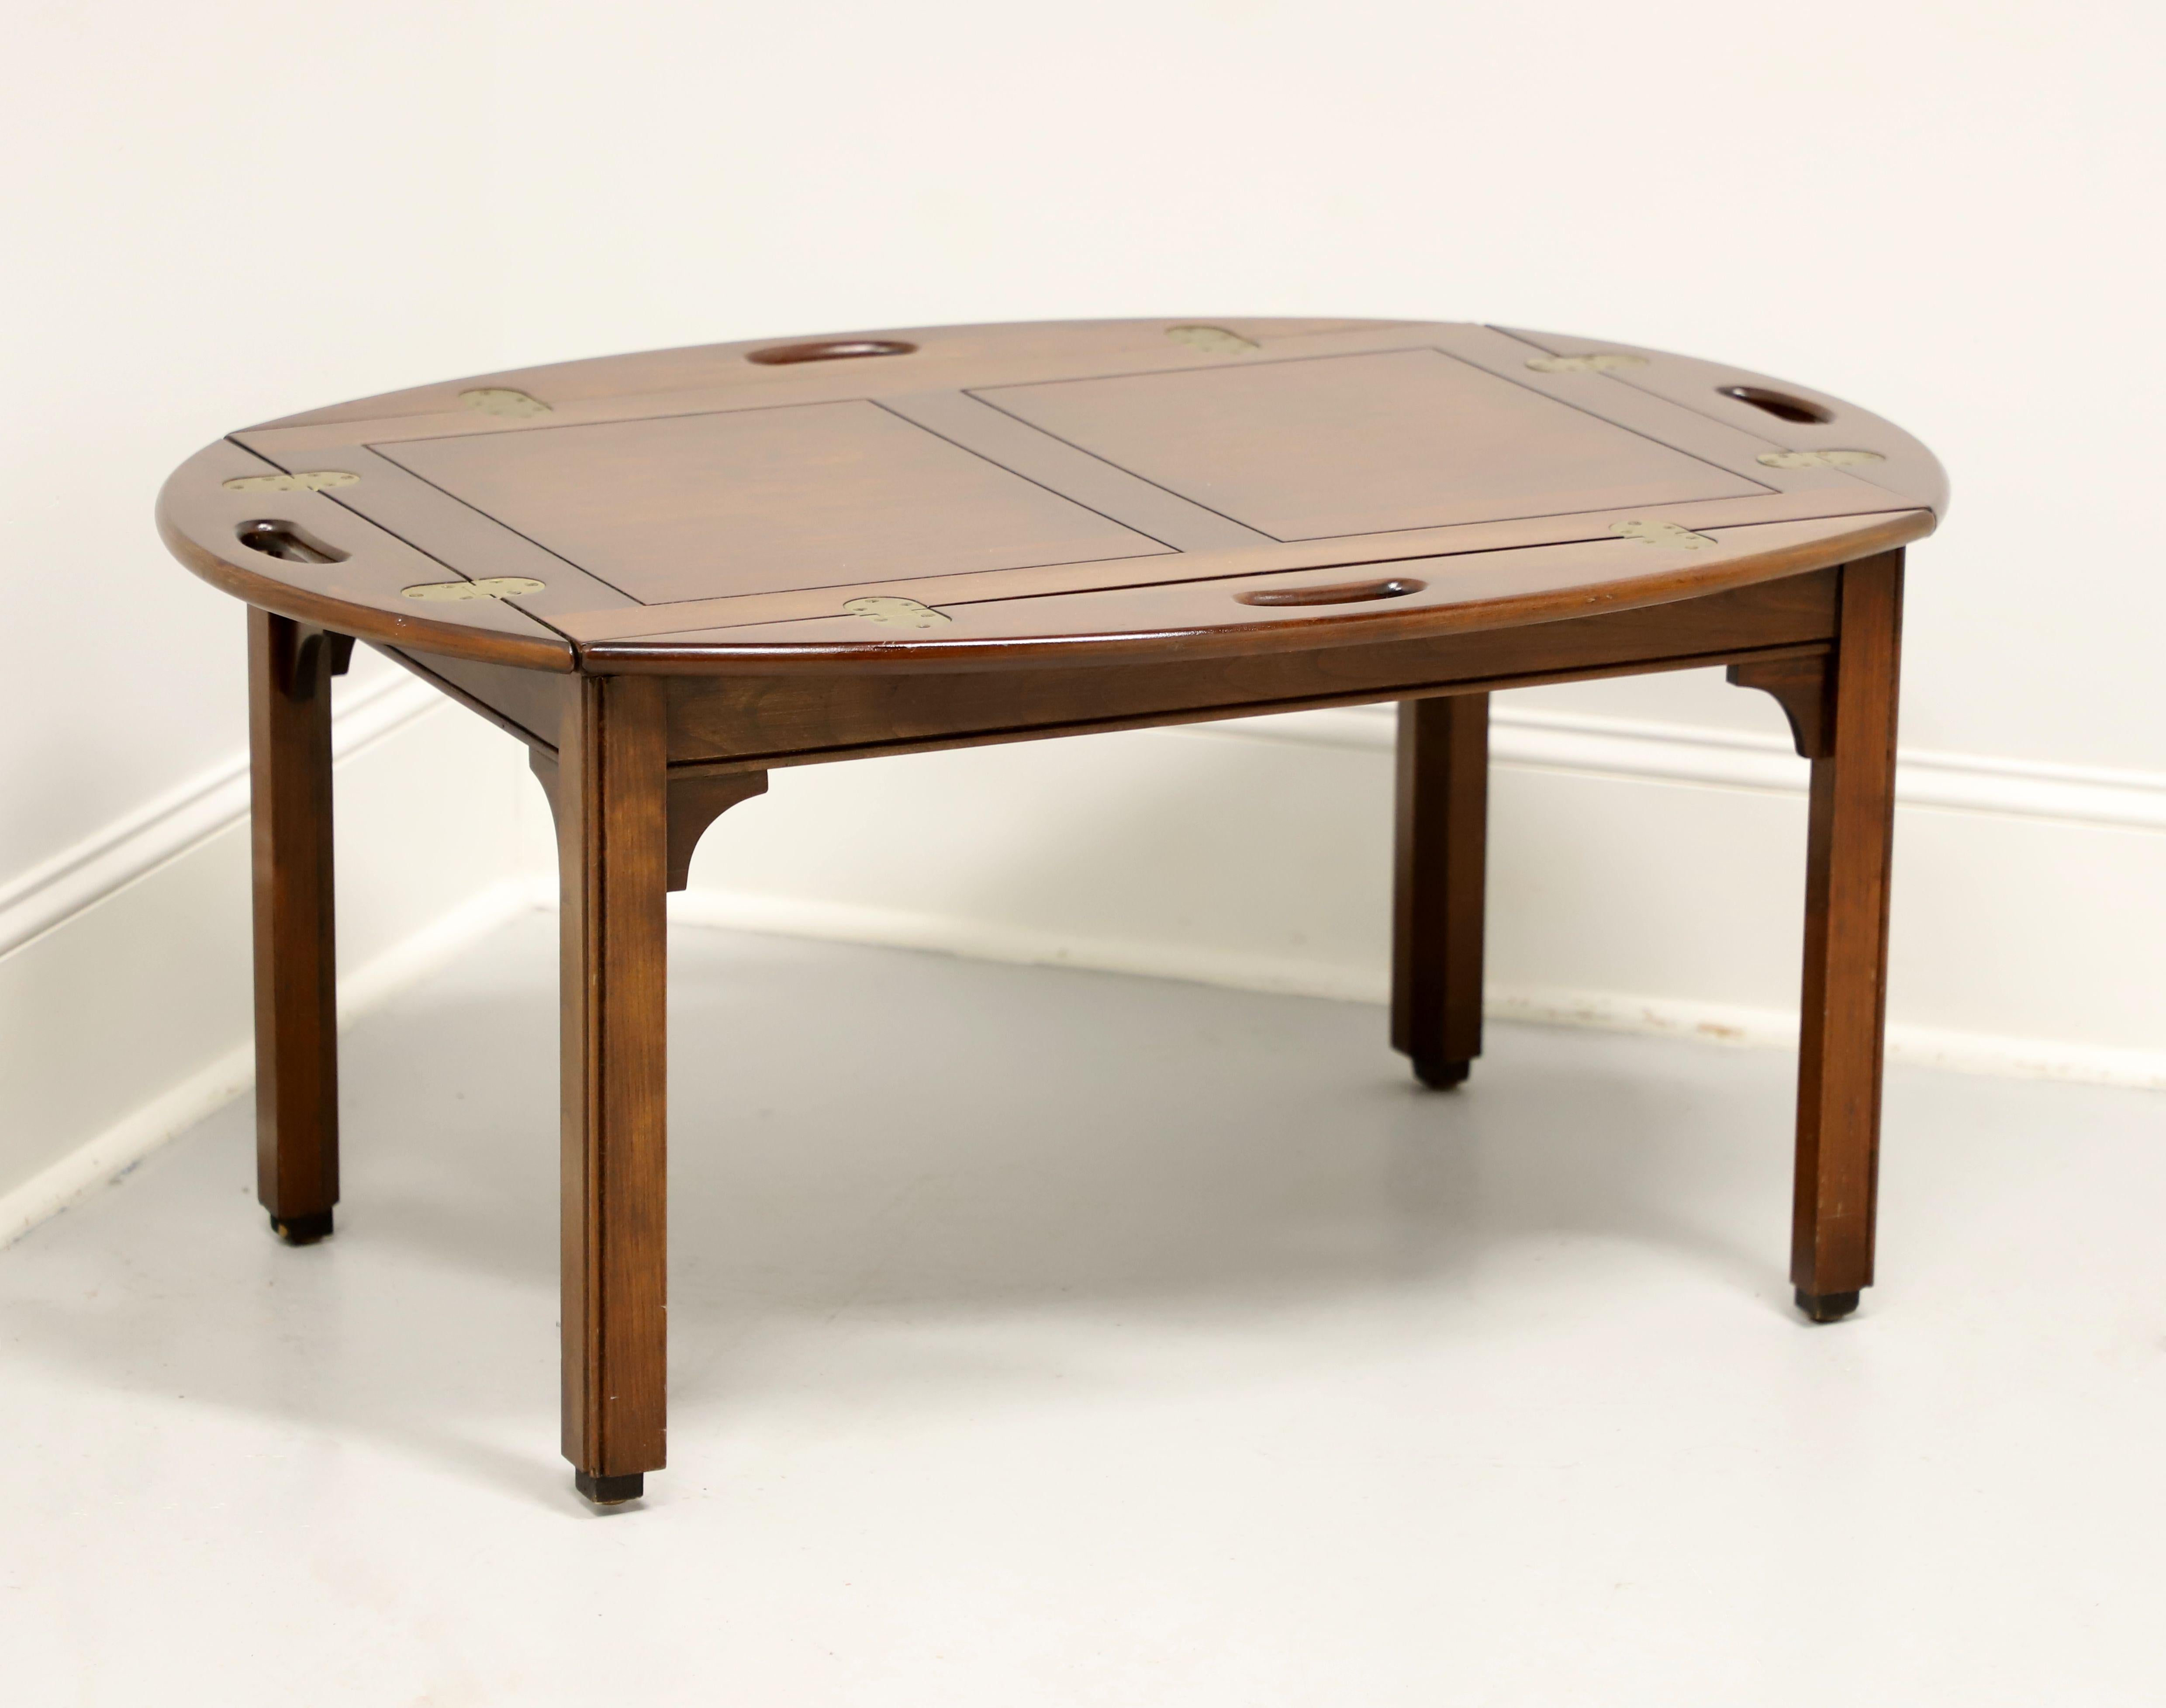 A Chippendale style butler's coffee table by Pennsylvania House. Solid cherry wood with brass hinge hardware, banded top, carved straight legs, and block feet. Features four fold down sides with carved open handles creating an oval shape when down.